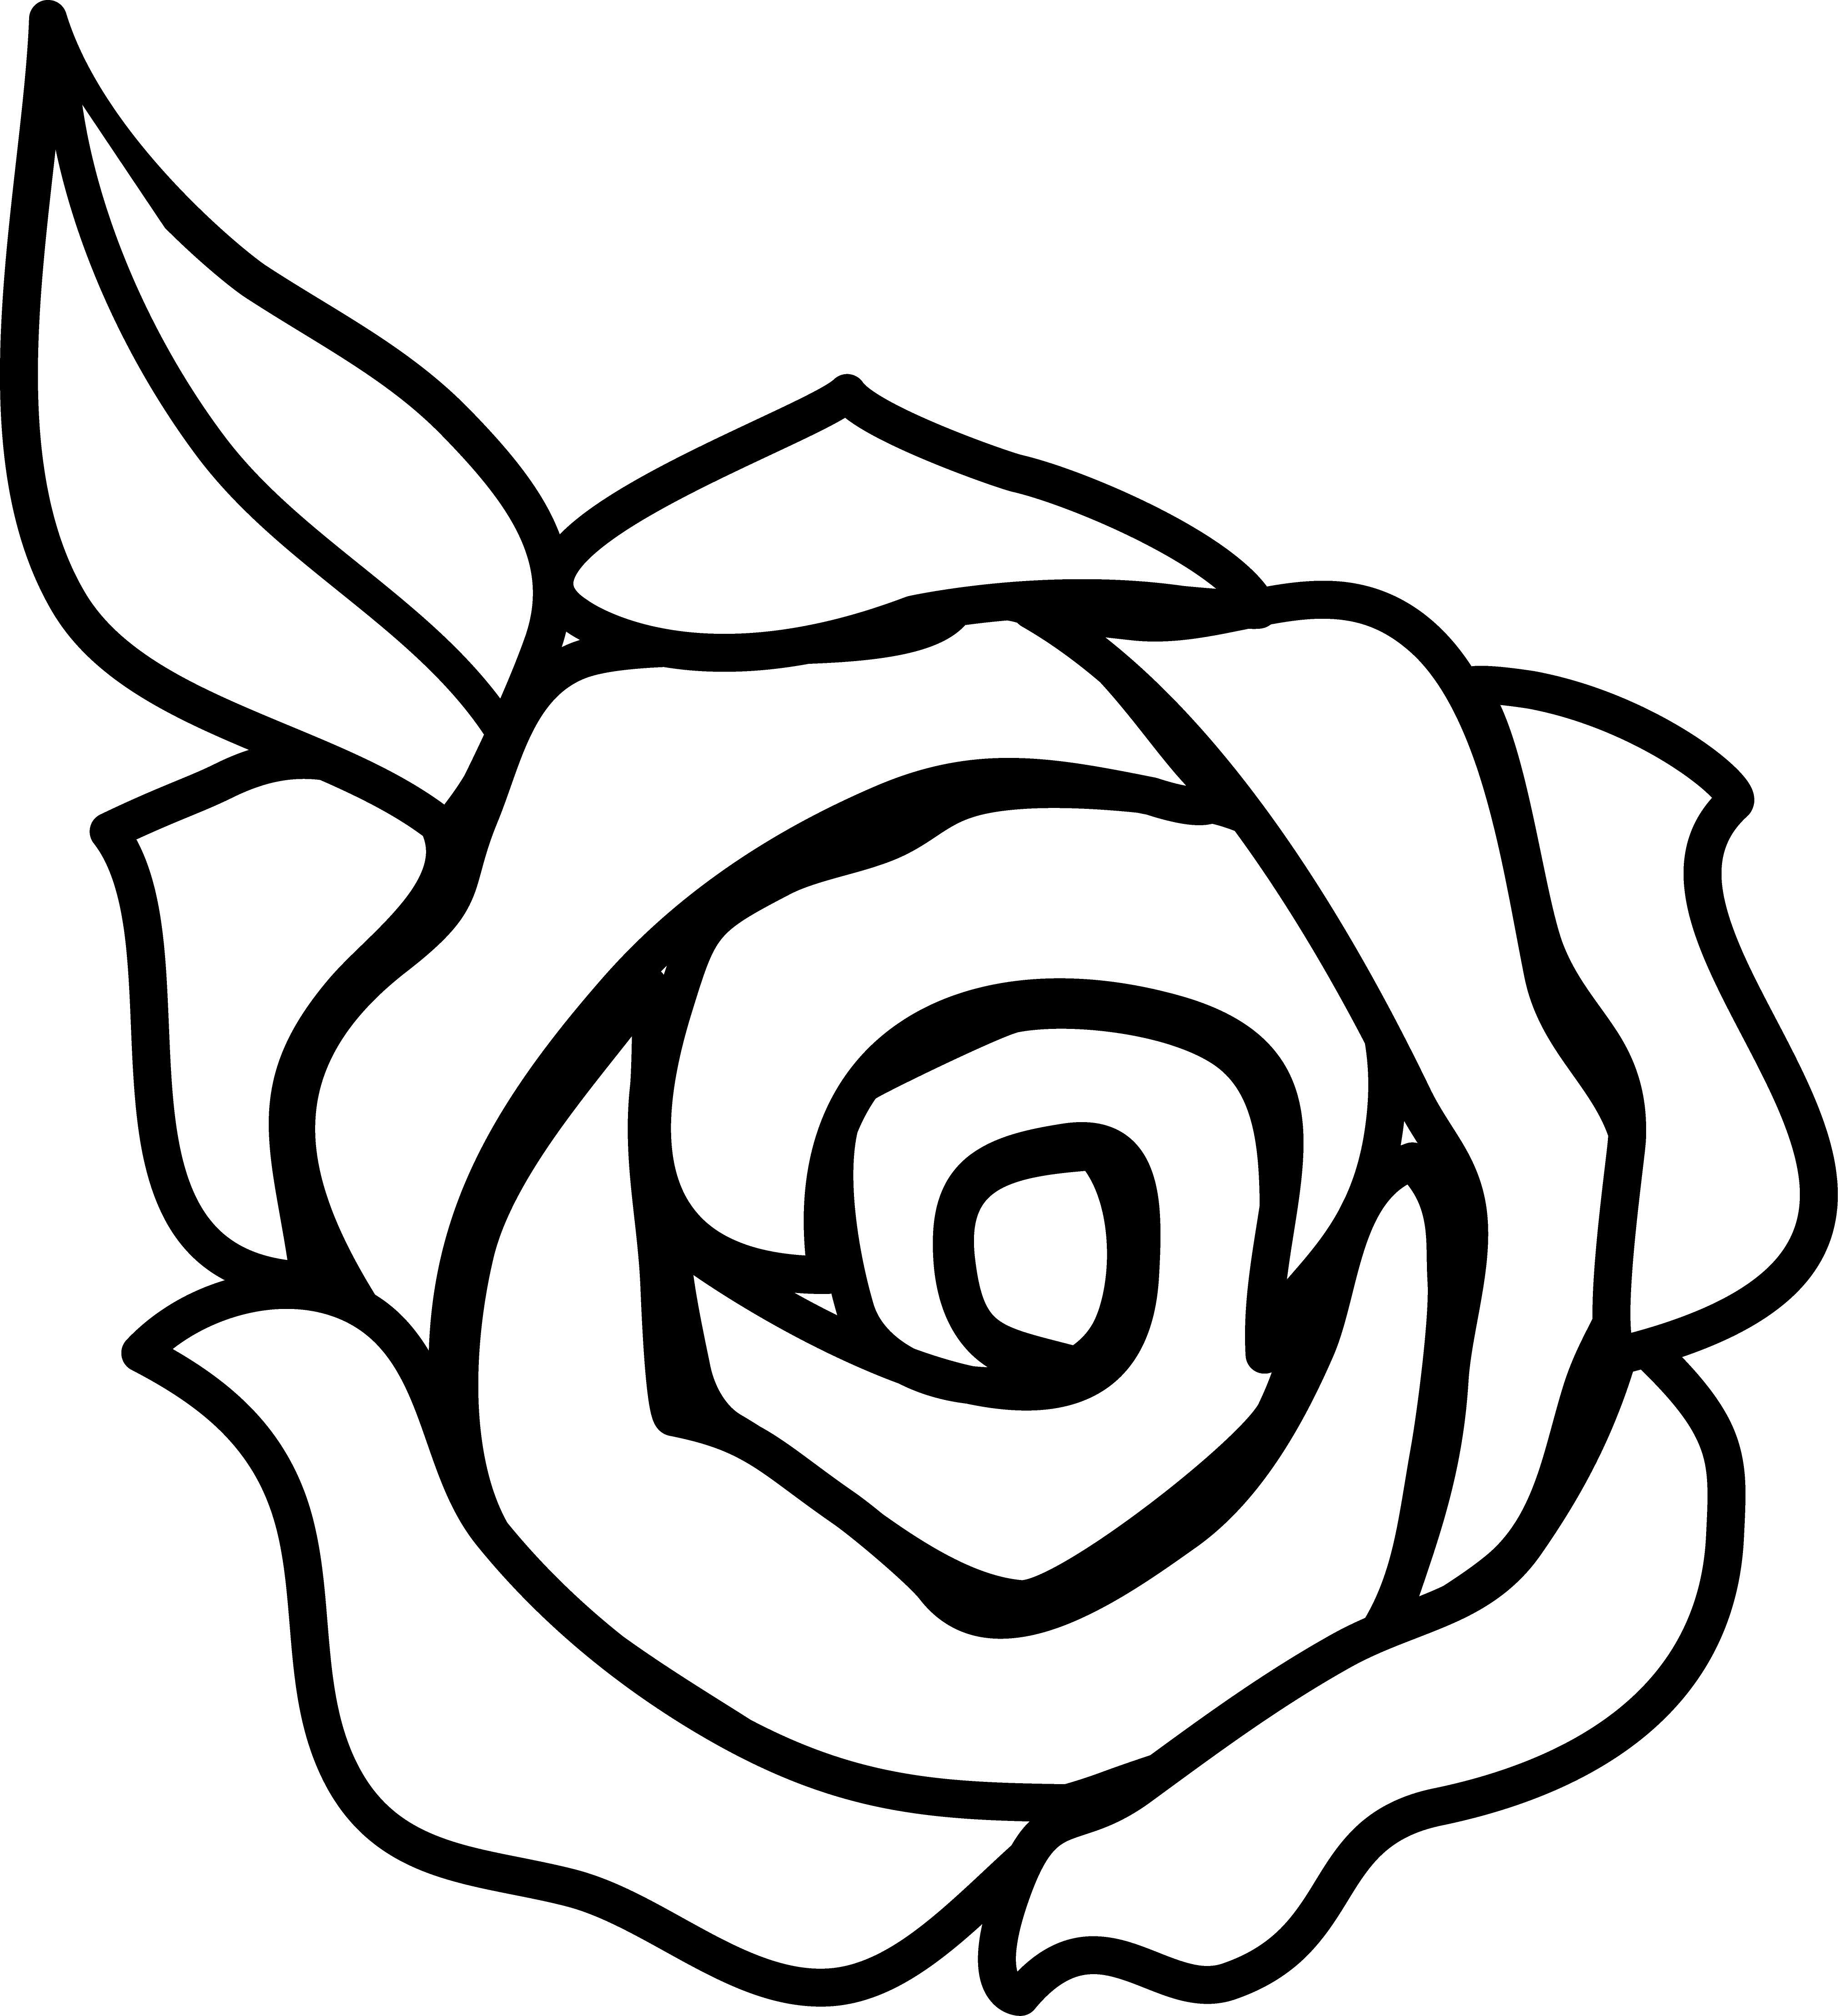 Simple Rose Clipart   Clipart Panda   Free Clipart Images